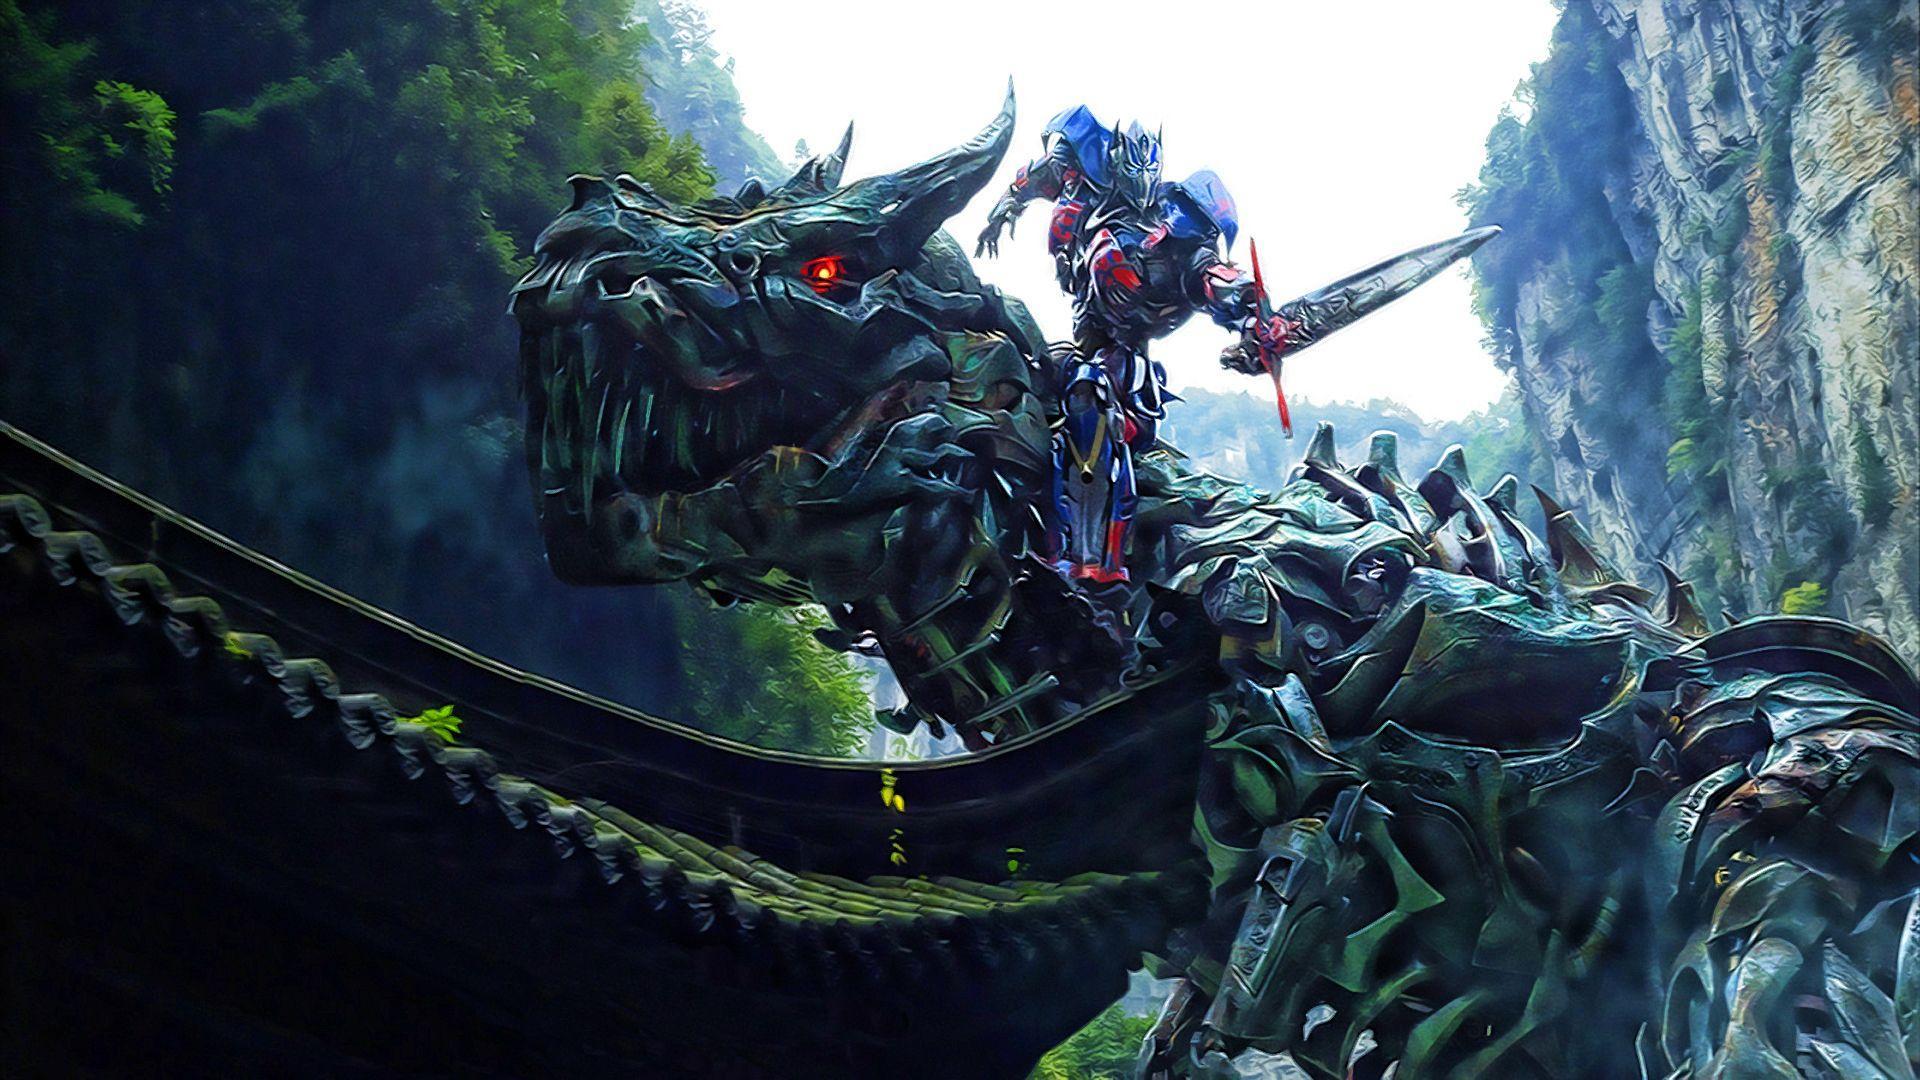 Breathtaking HD Wallpaper of Transformers: Age of Extinction